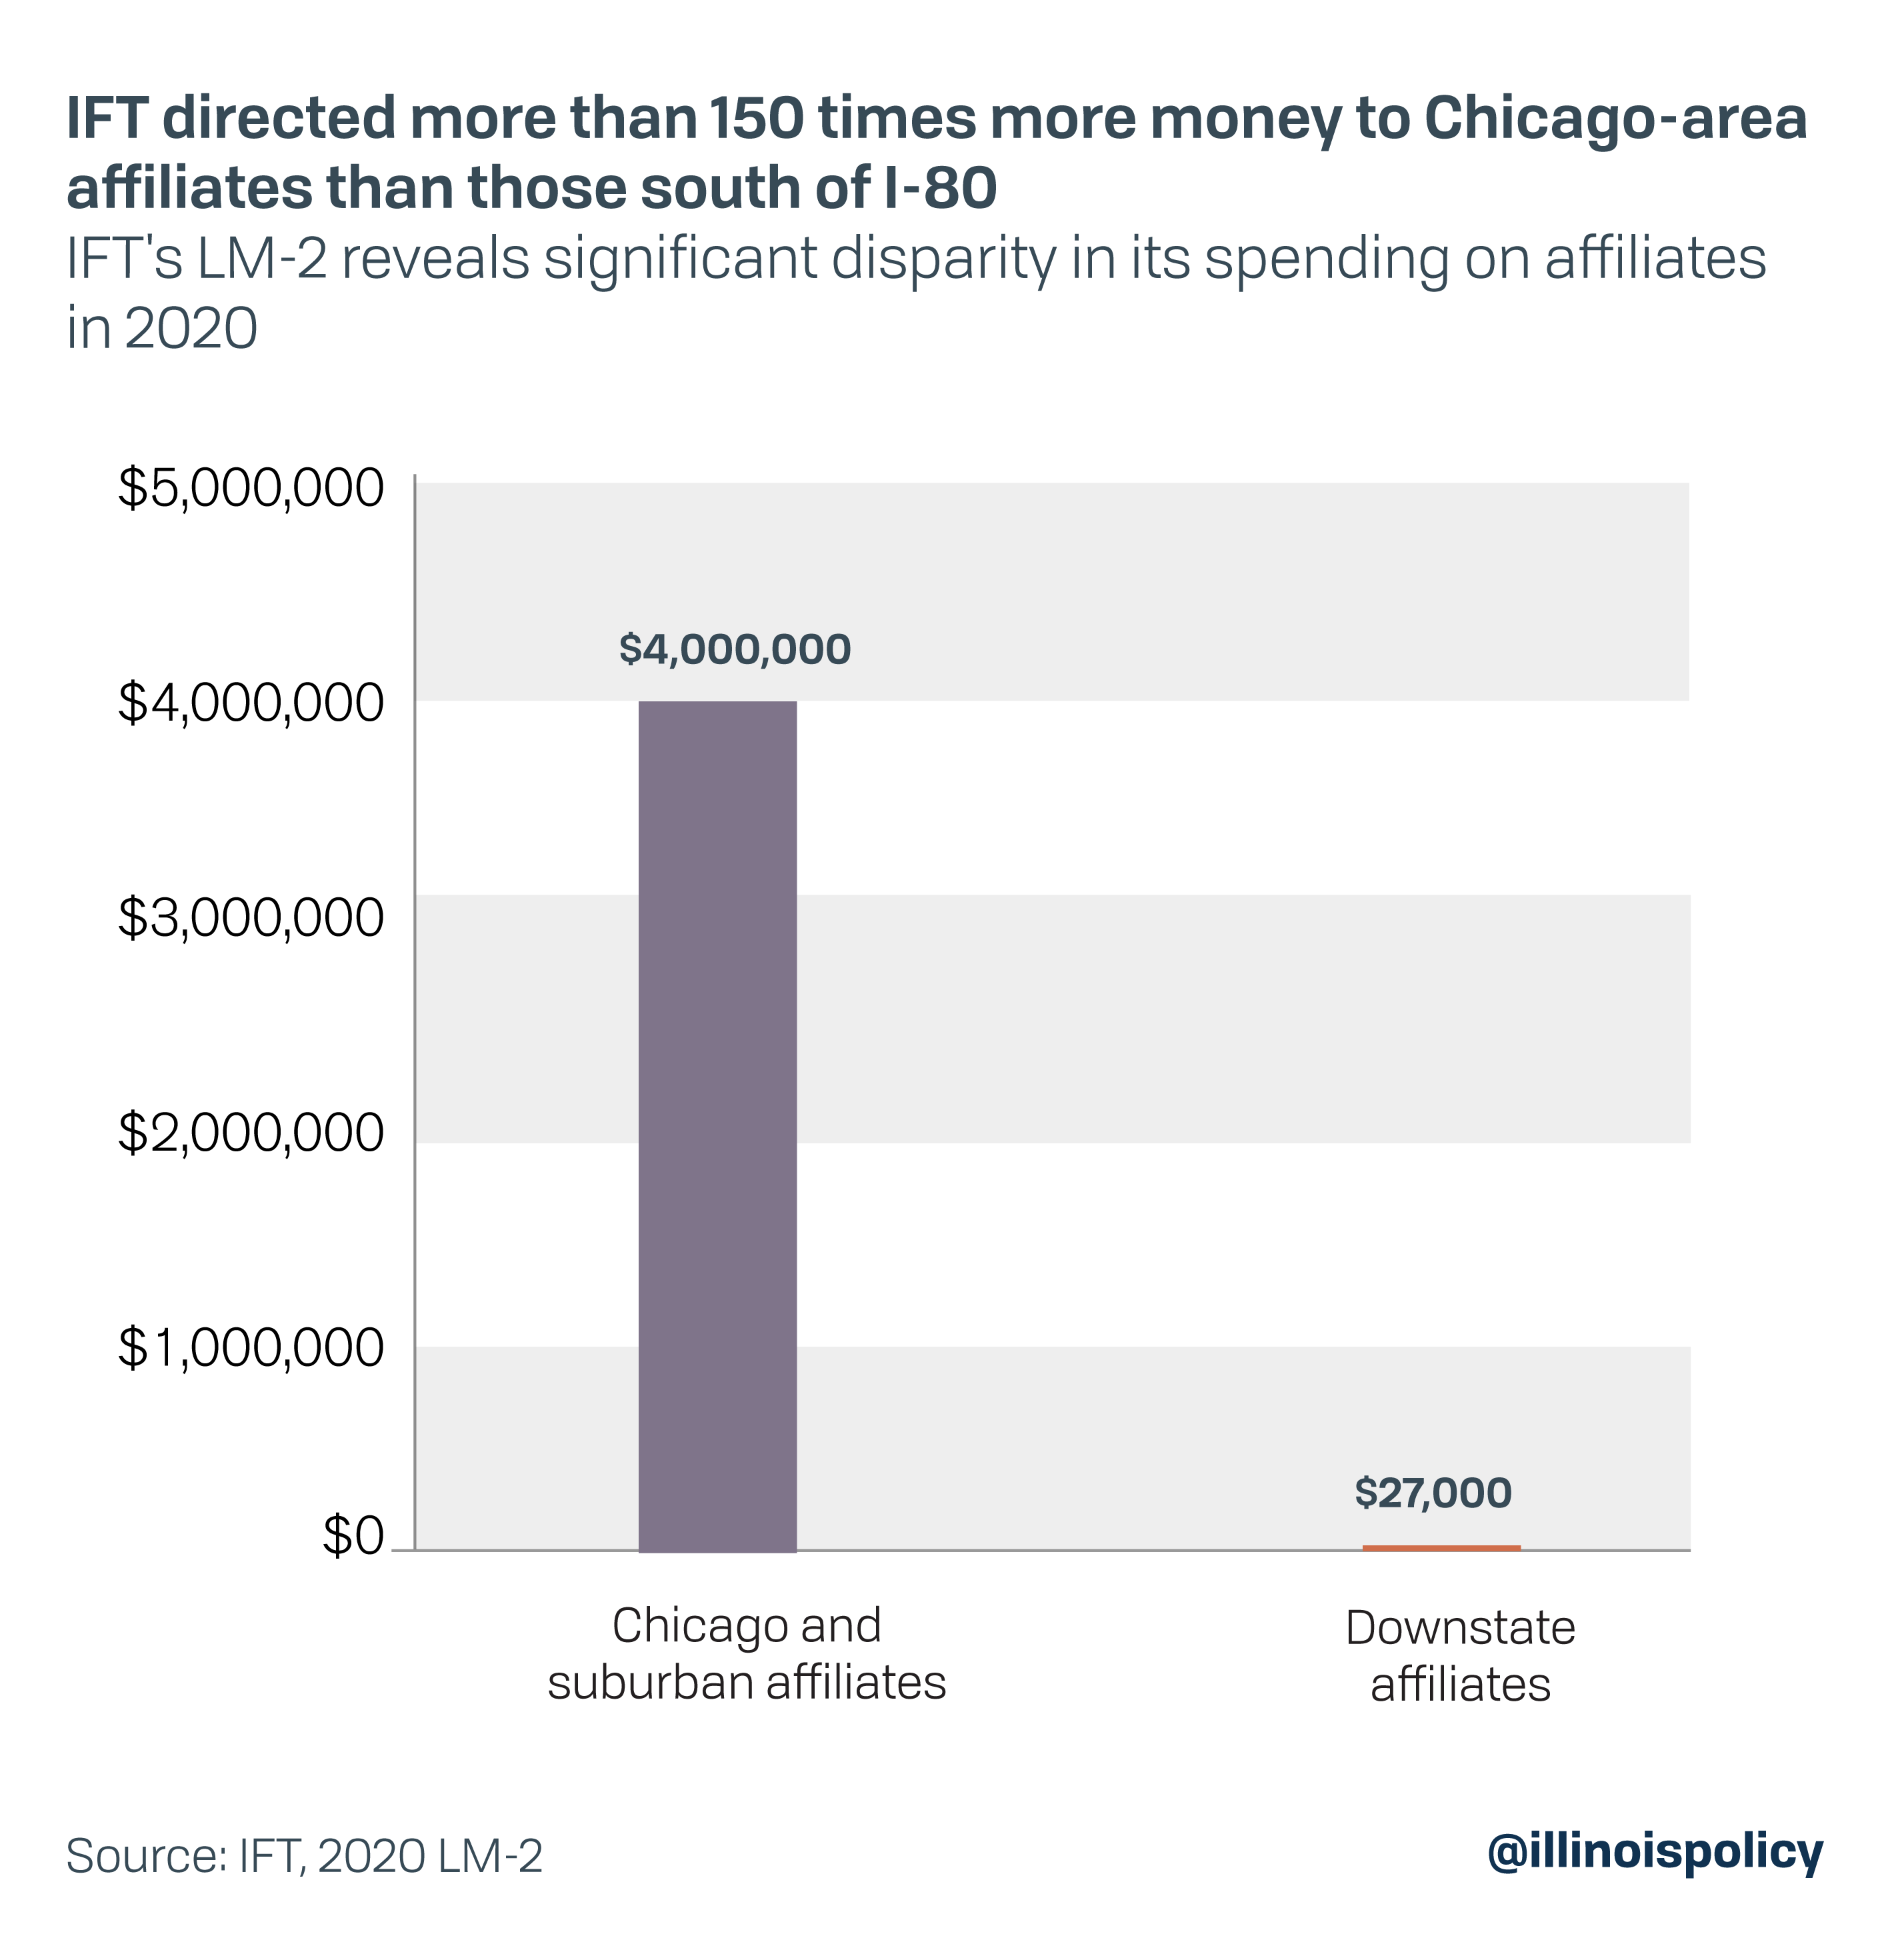 IFT directed more than 150 times more money to Chicago-area affiliates than those south of I-80